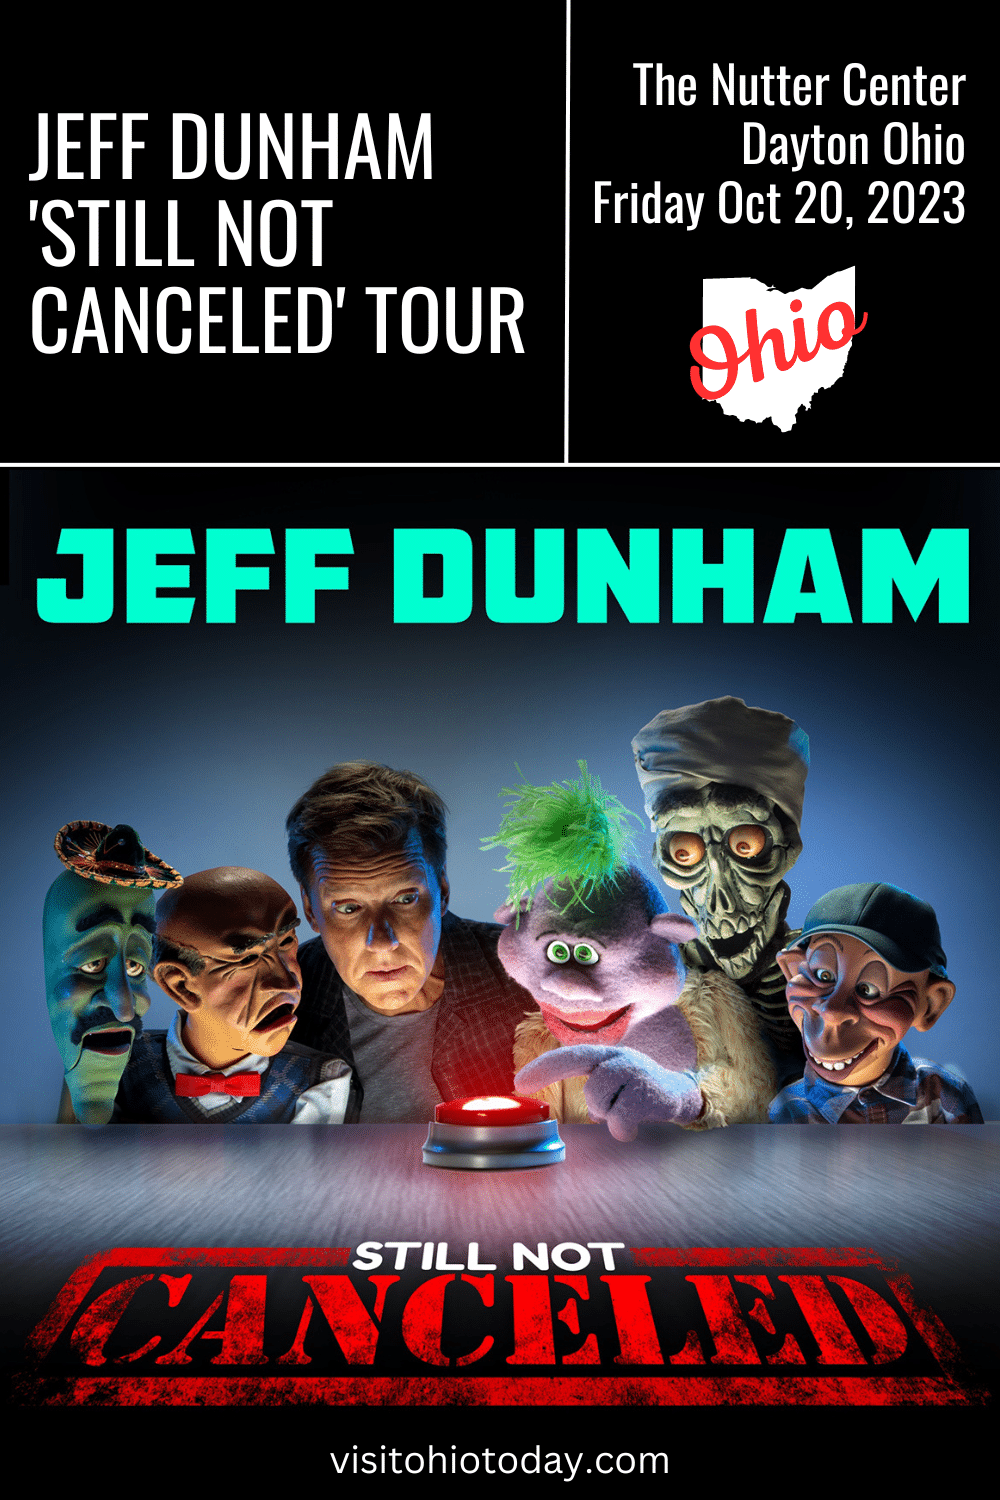 The Nutter Center in Dayton kicks off the second leg of the 2023 Jeff Dunham 'Still Not Canceled' Tour, Friday, October 20th.